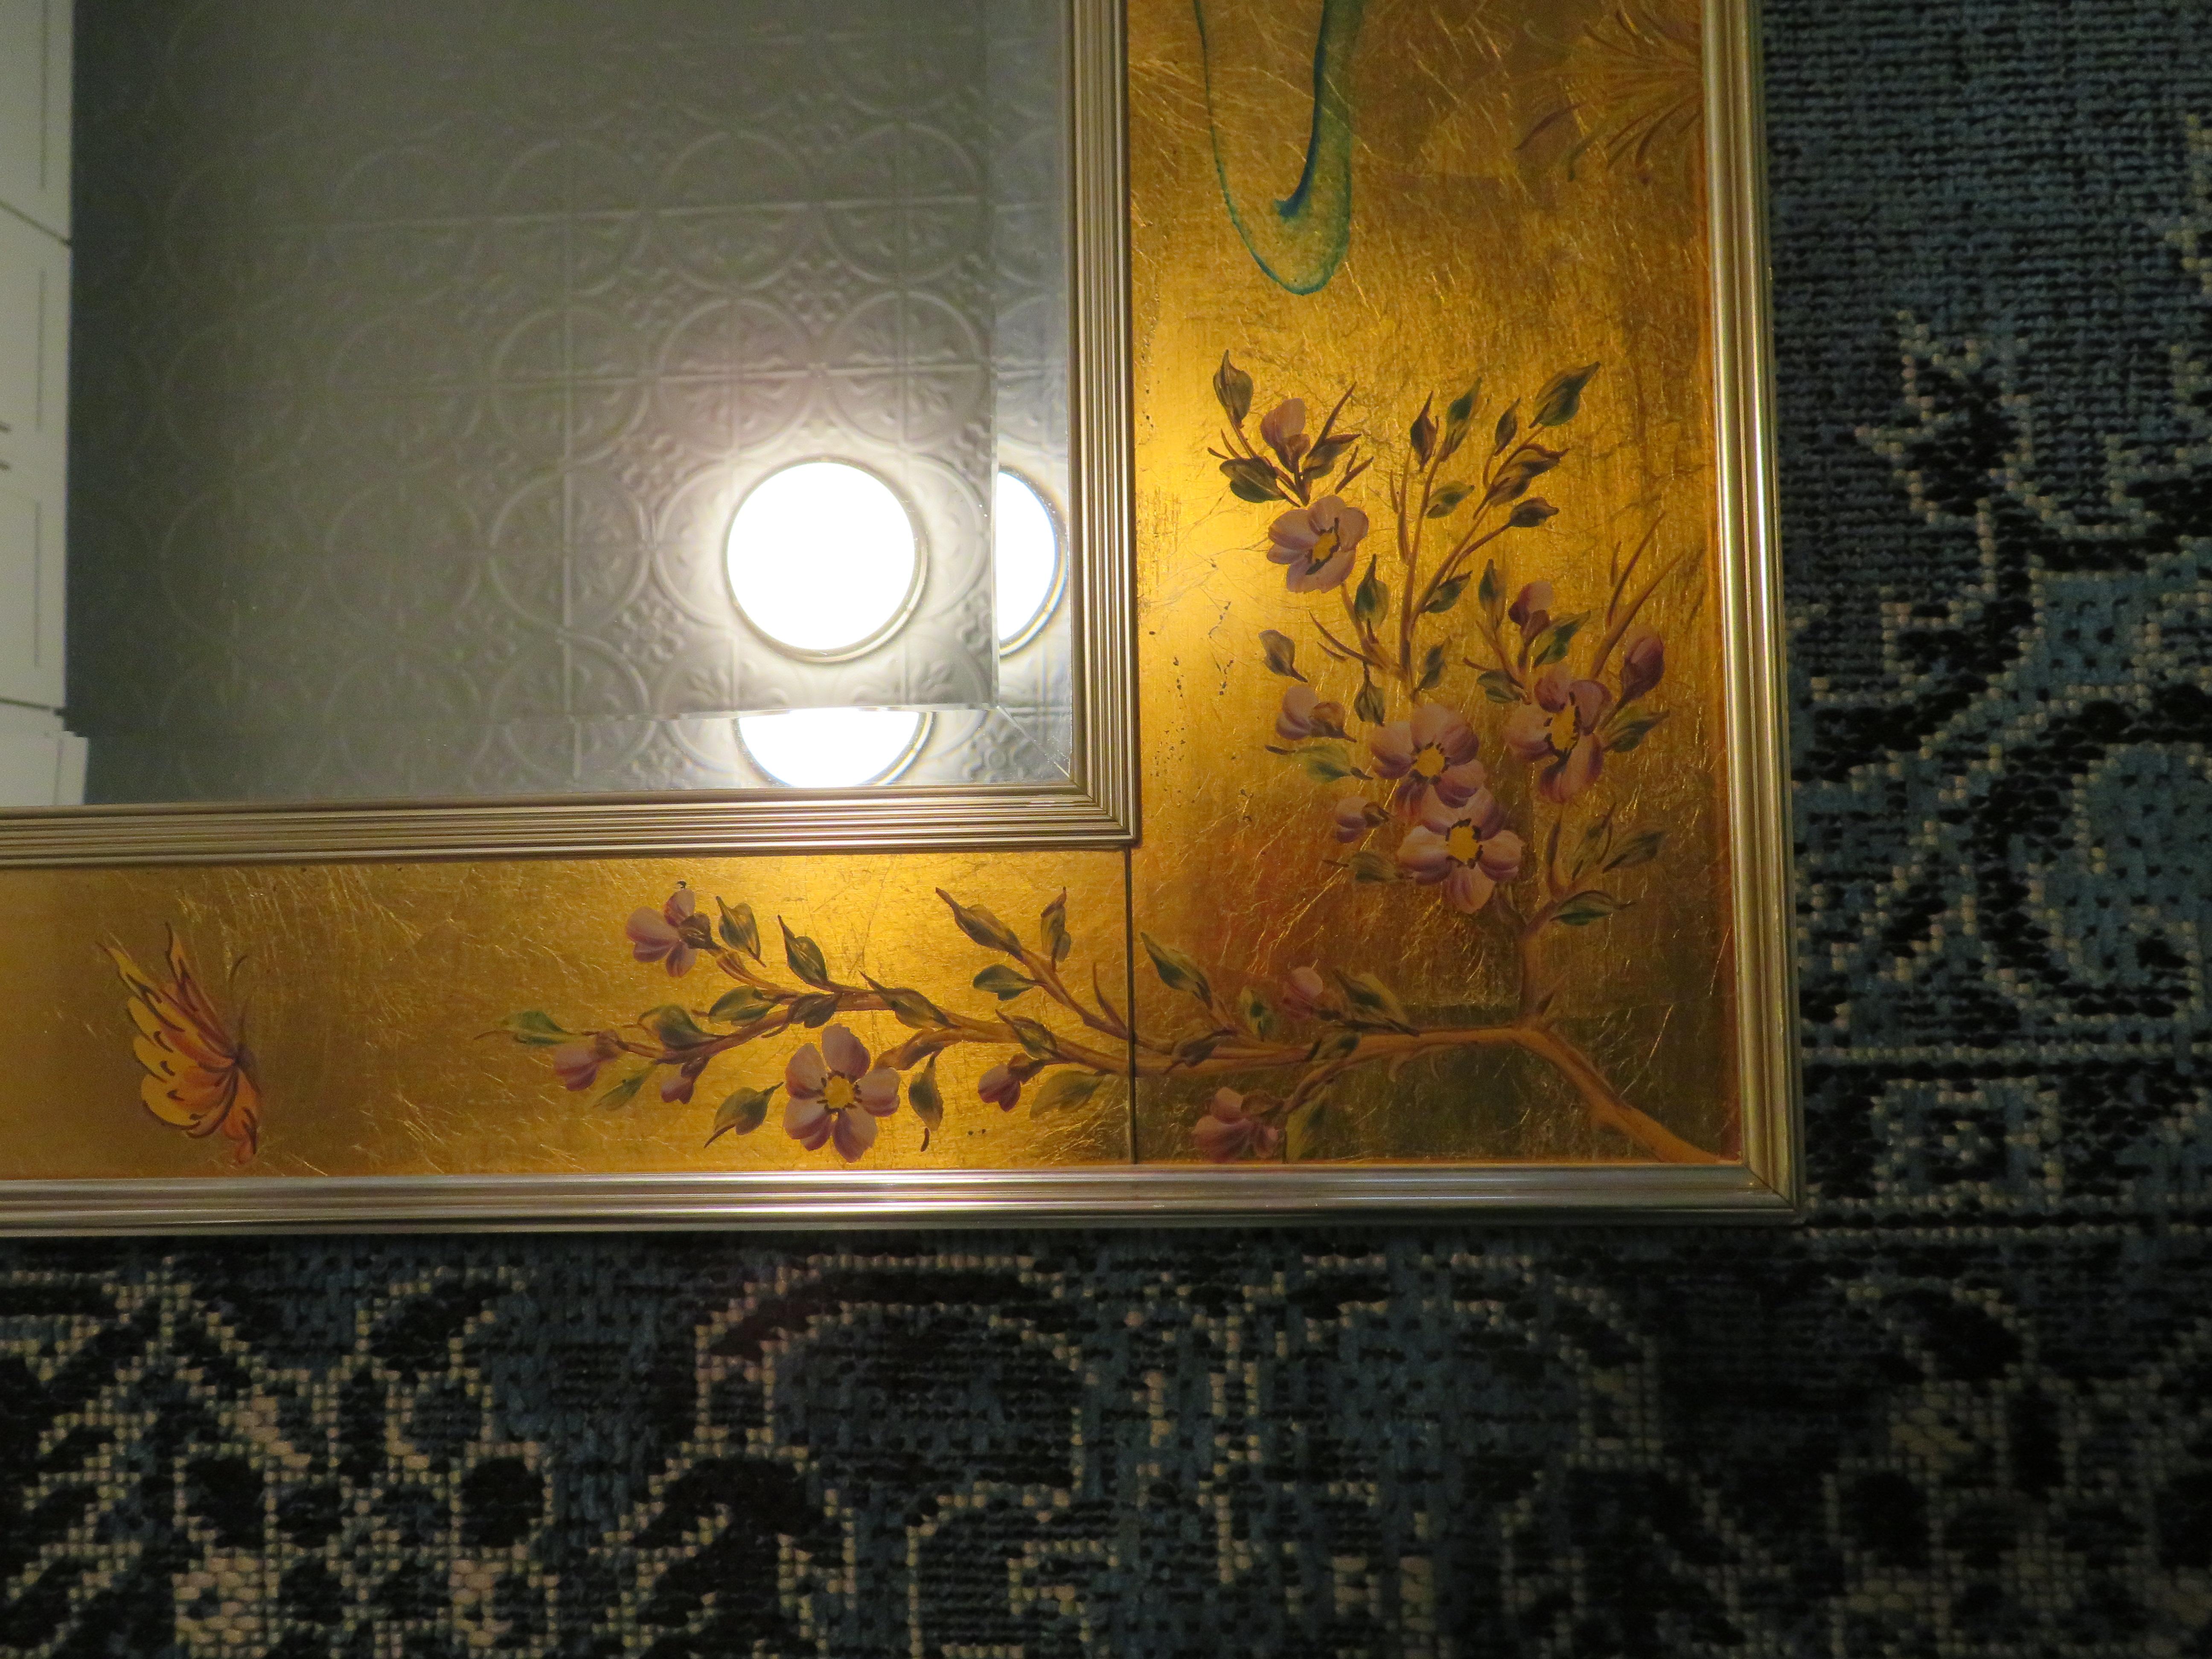 Stunning Labarge églomisé beveled mirror with reverse painted Asian scenery on a gold background; hallmarks on back.